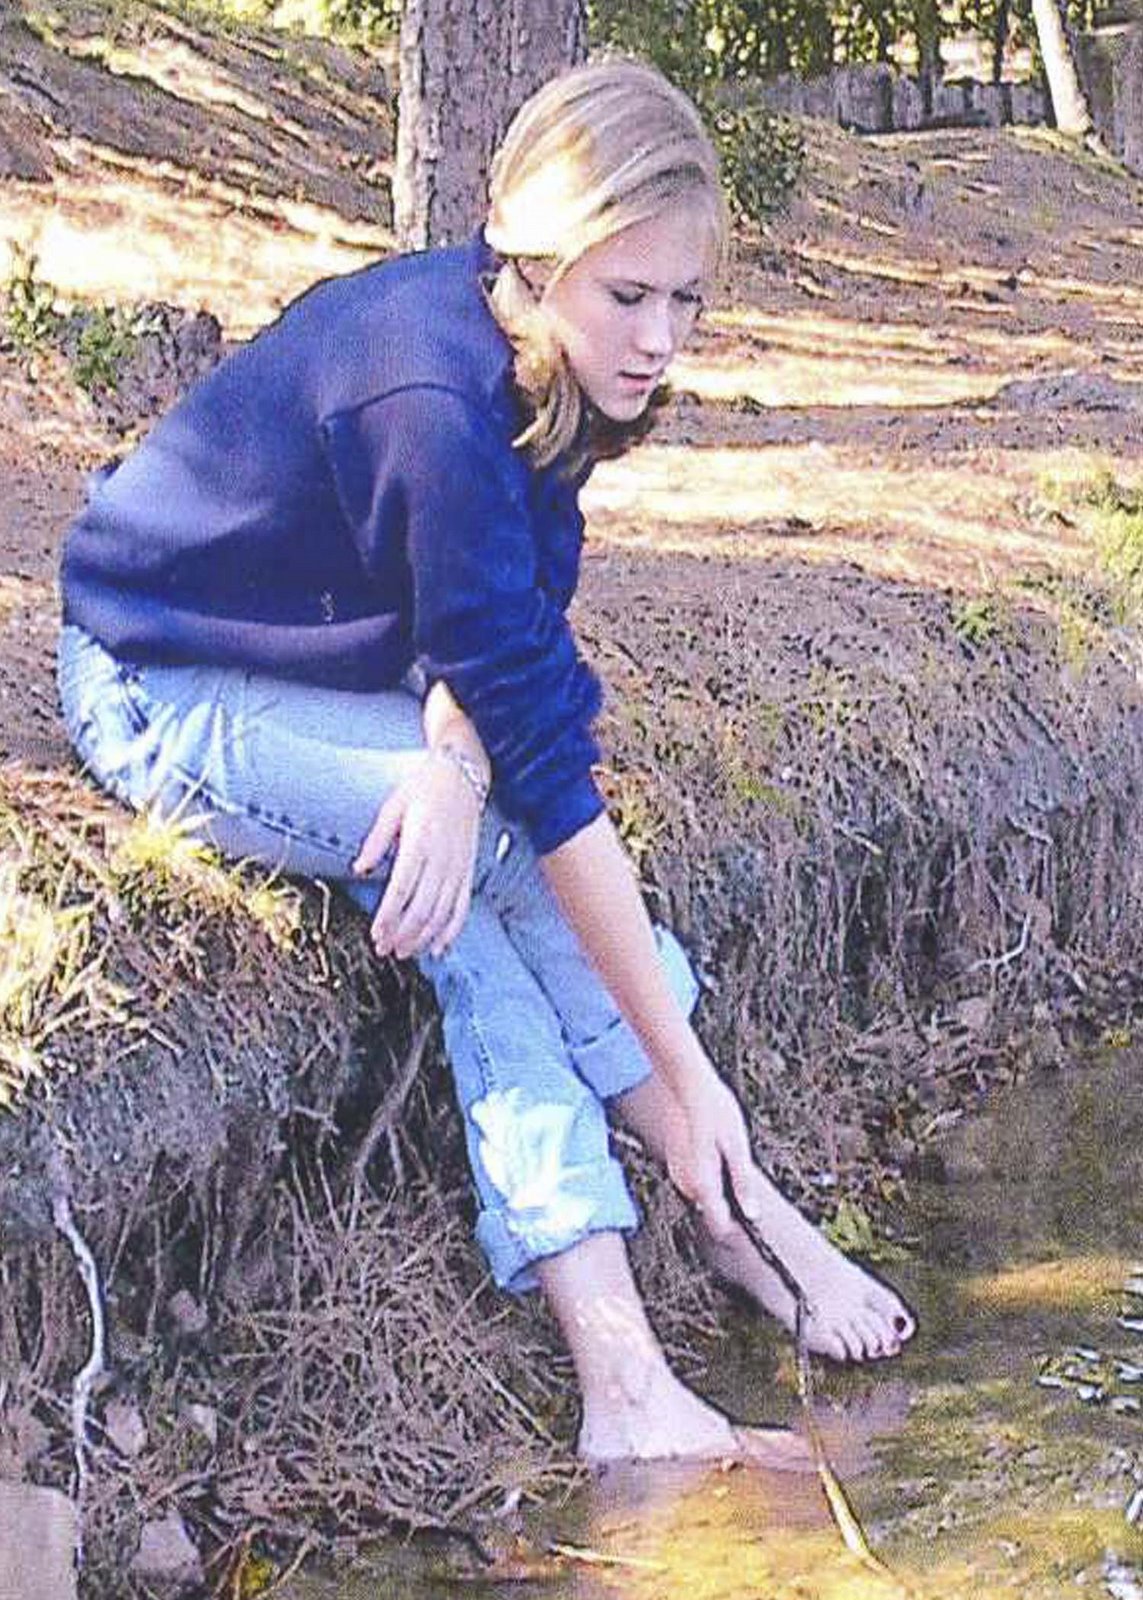 [Alicia+with+feet+in+the+water+cropped.jpg]